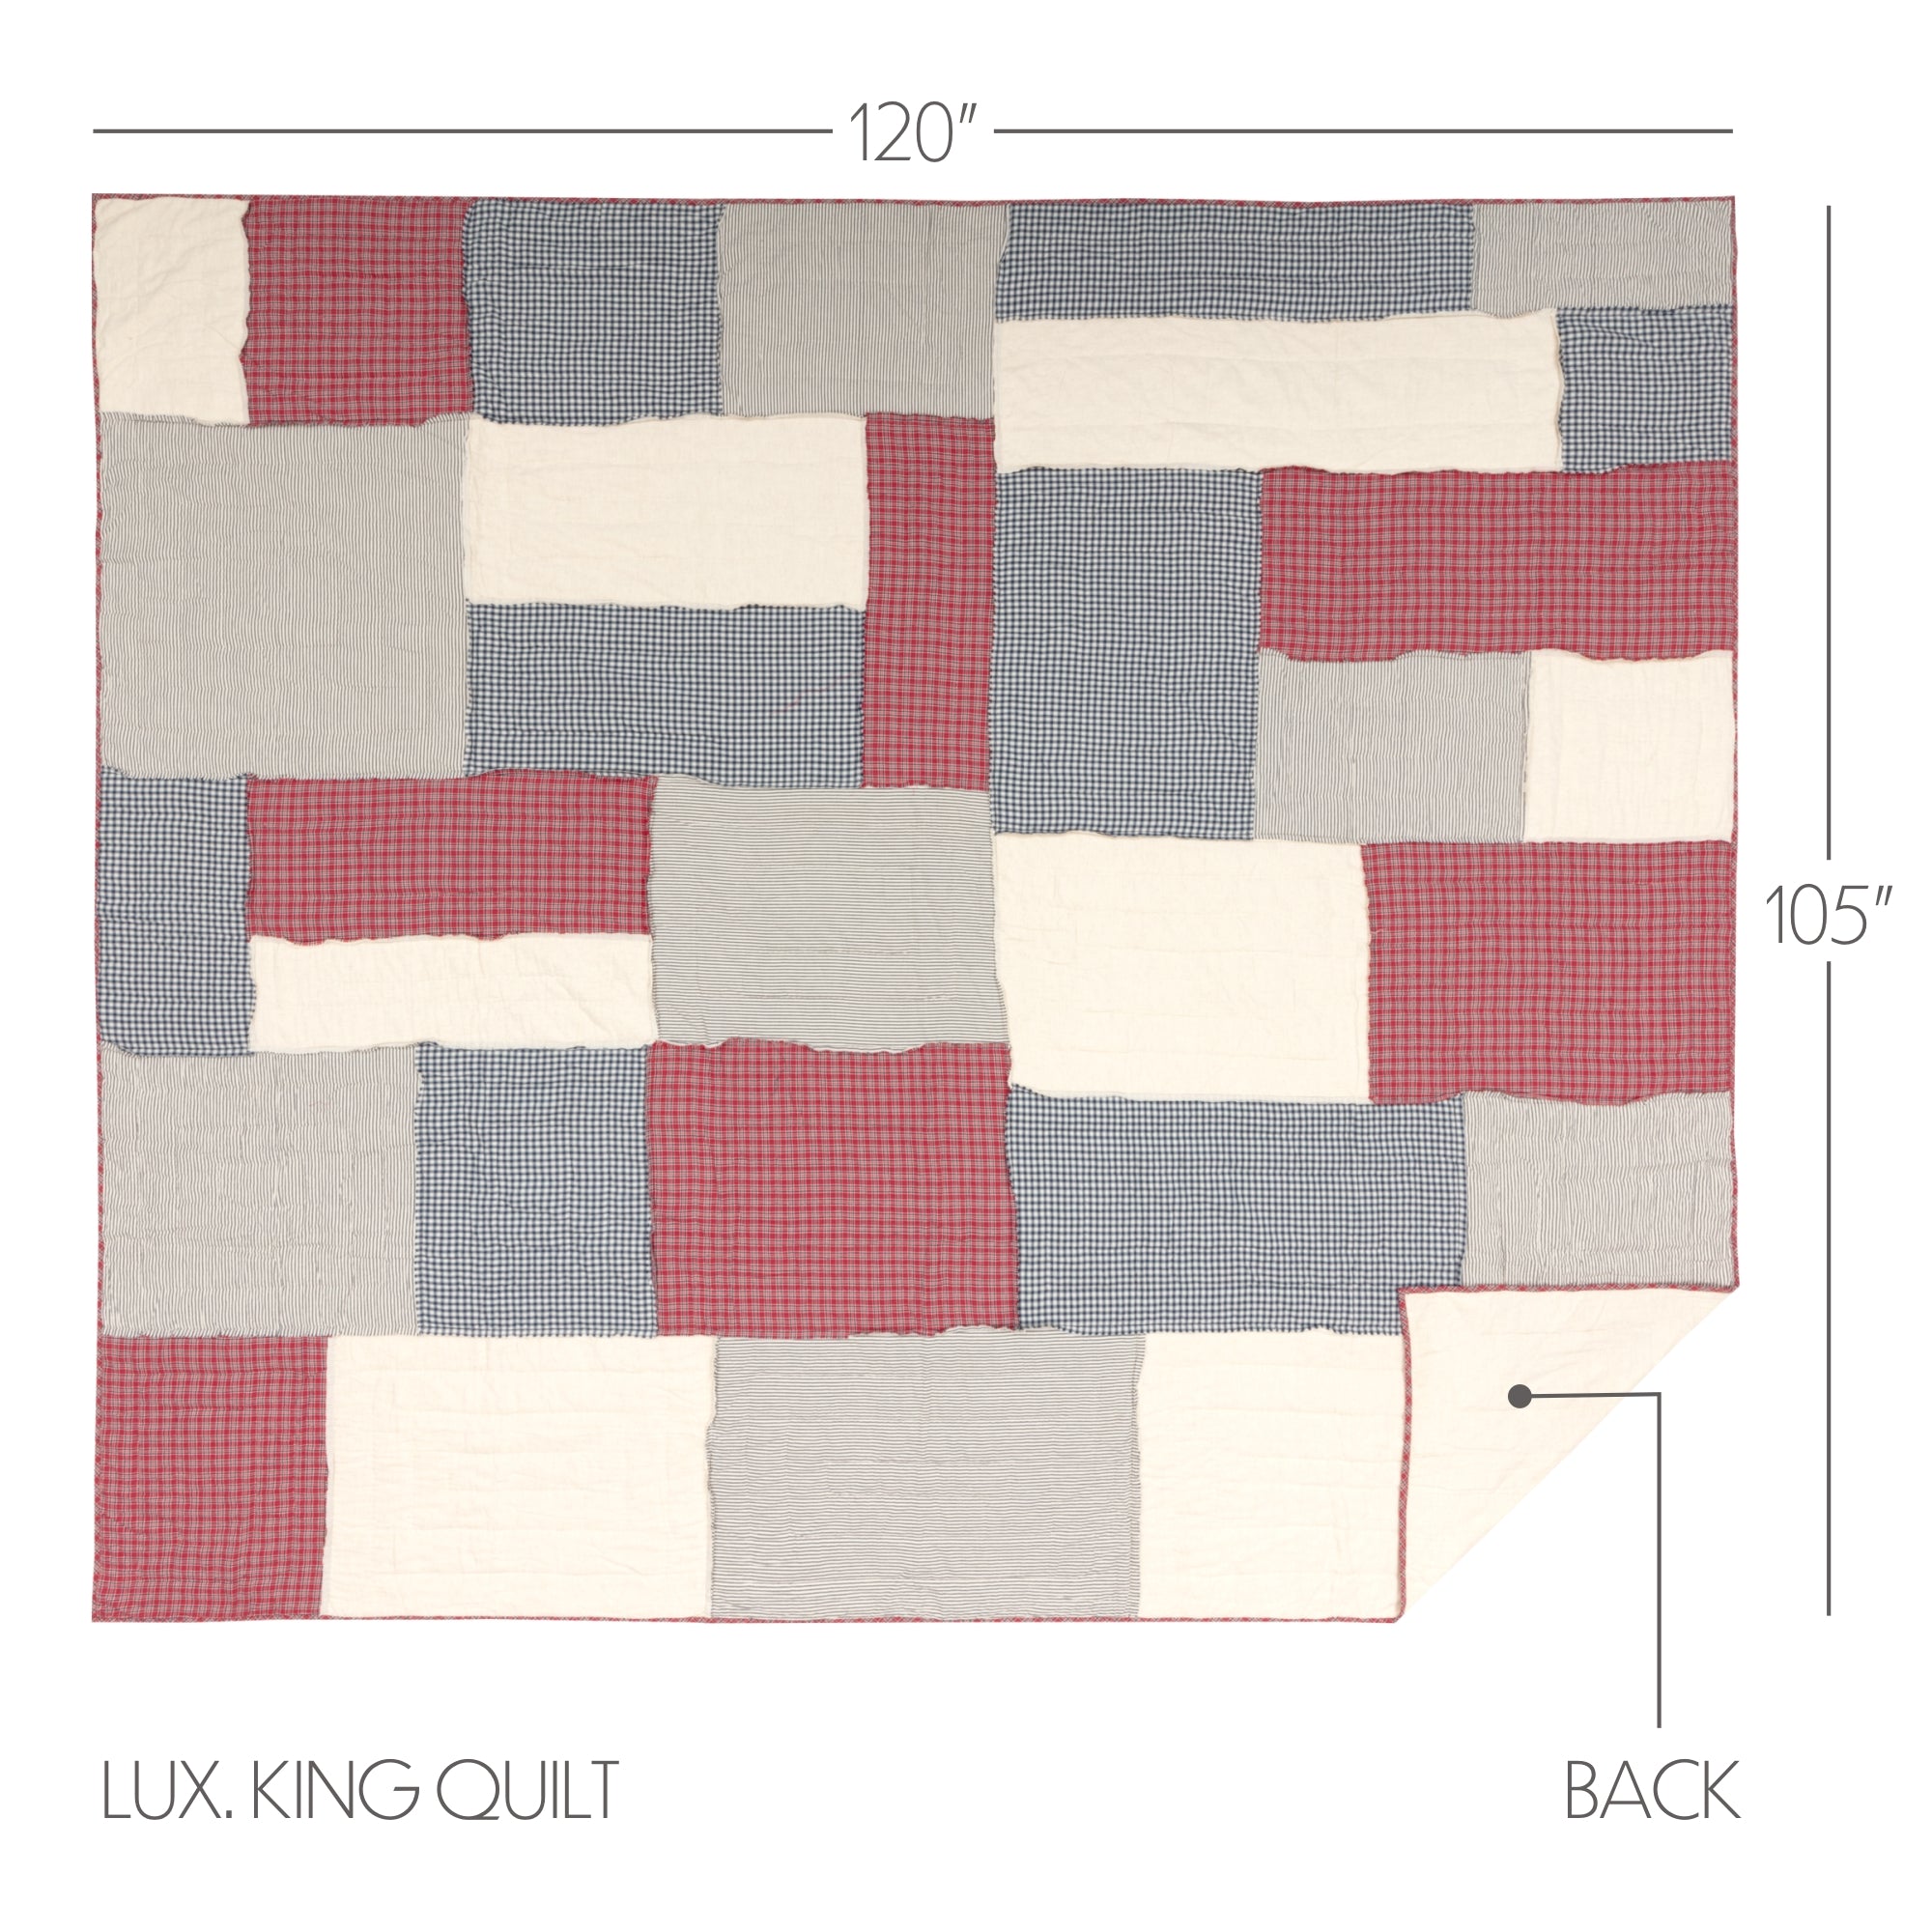 Hatteras Patch Luxury King Quilt 120Wx105L